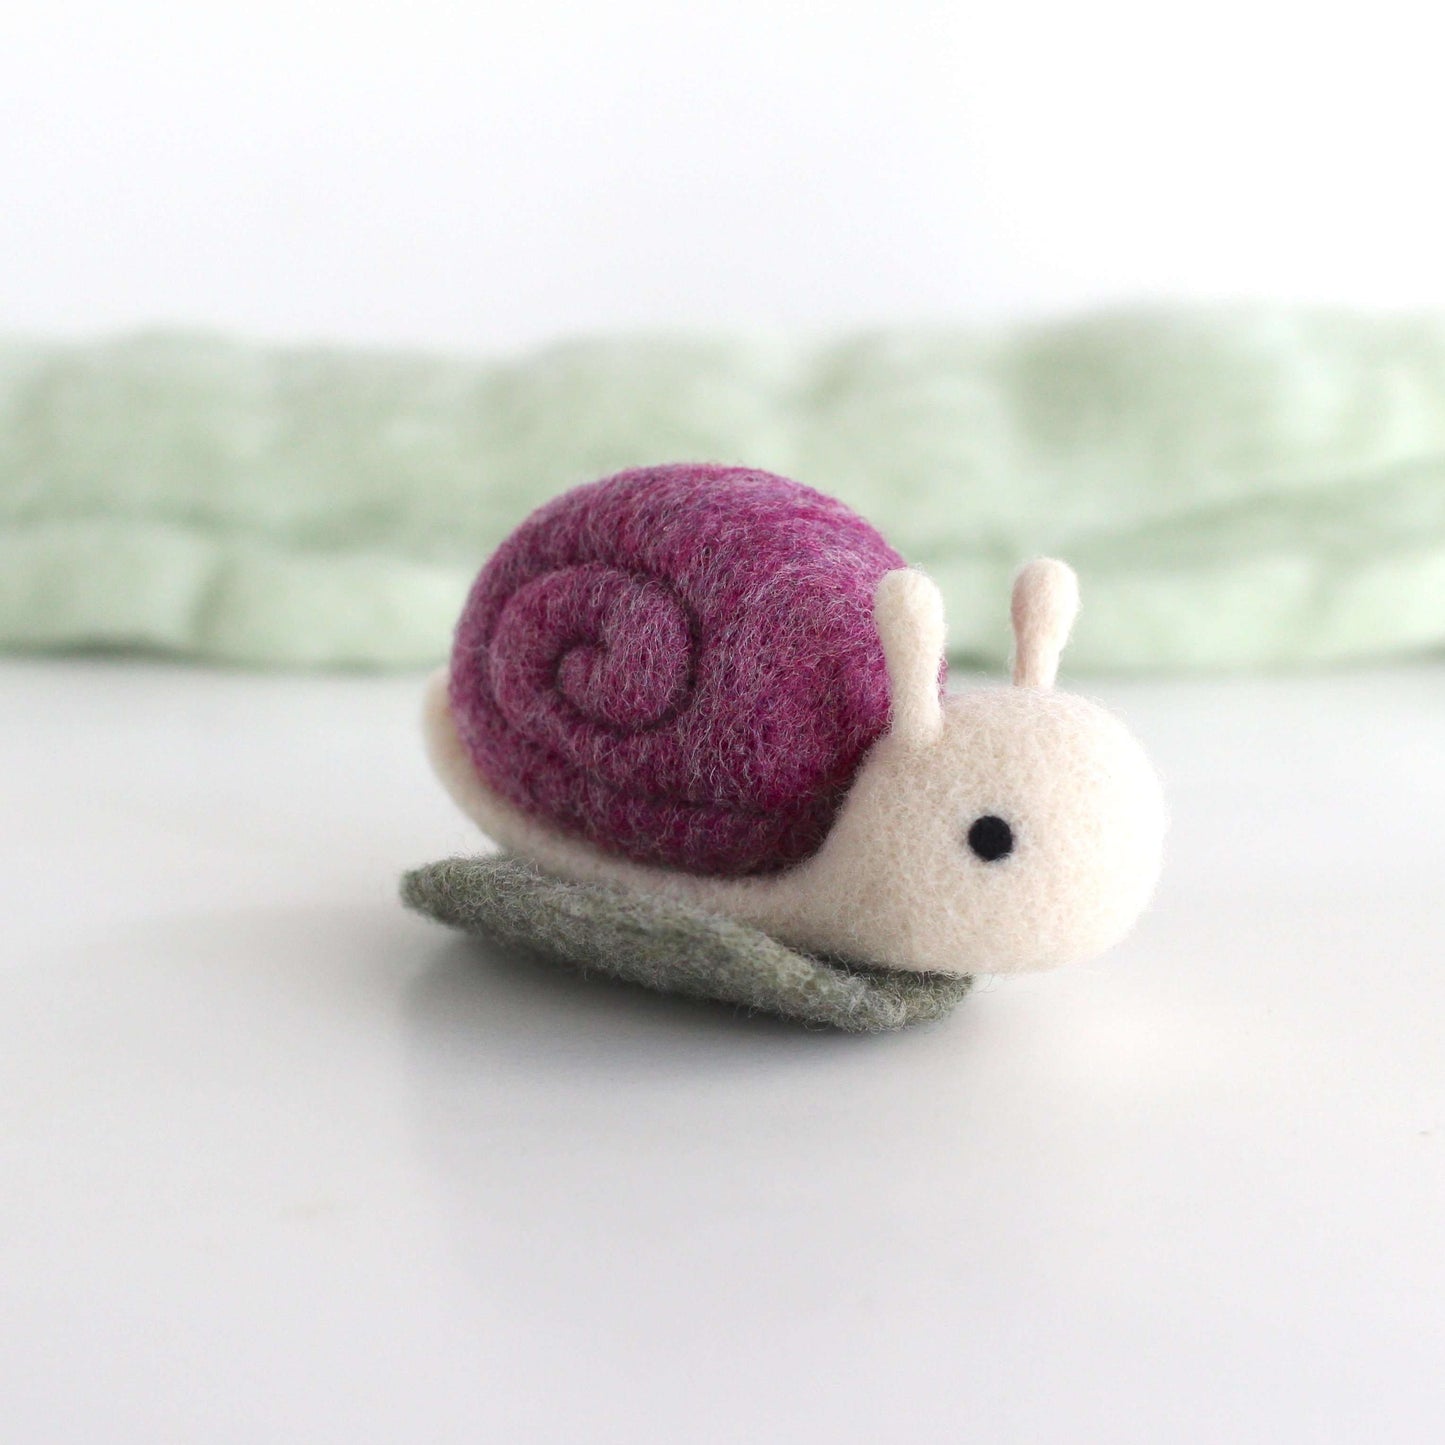 Needle Felted Snail on a Leaf (Purple) by Wild Whimsy Woolies